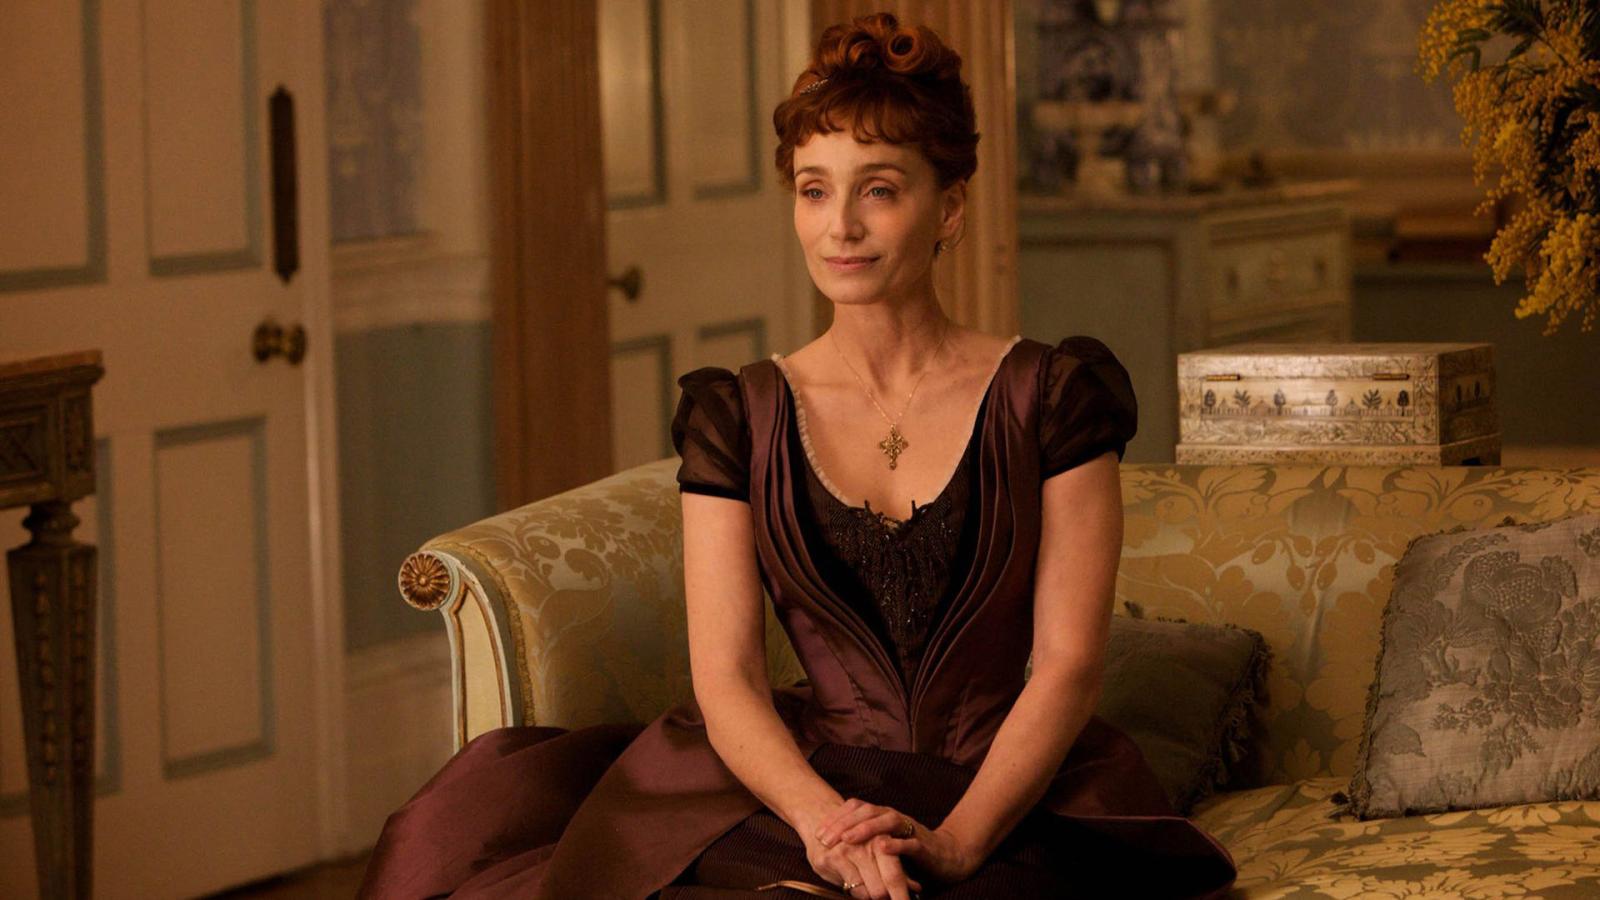 8 Underrated Kristin Scott Thomas Movies Fans Need to See - image 7